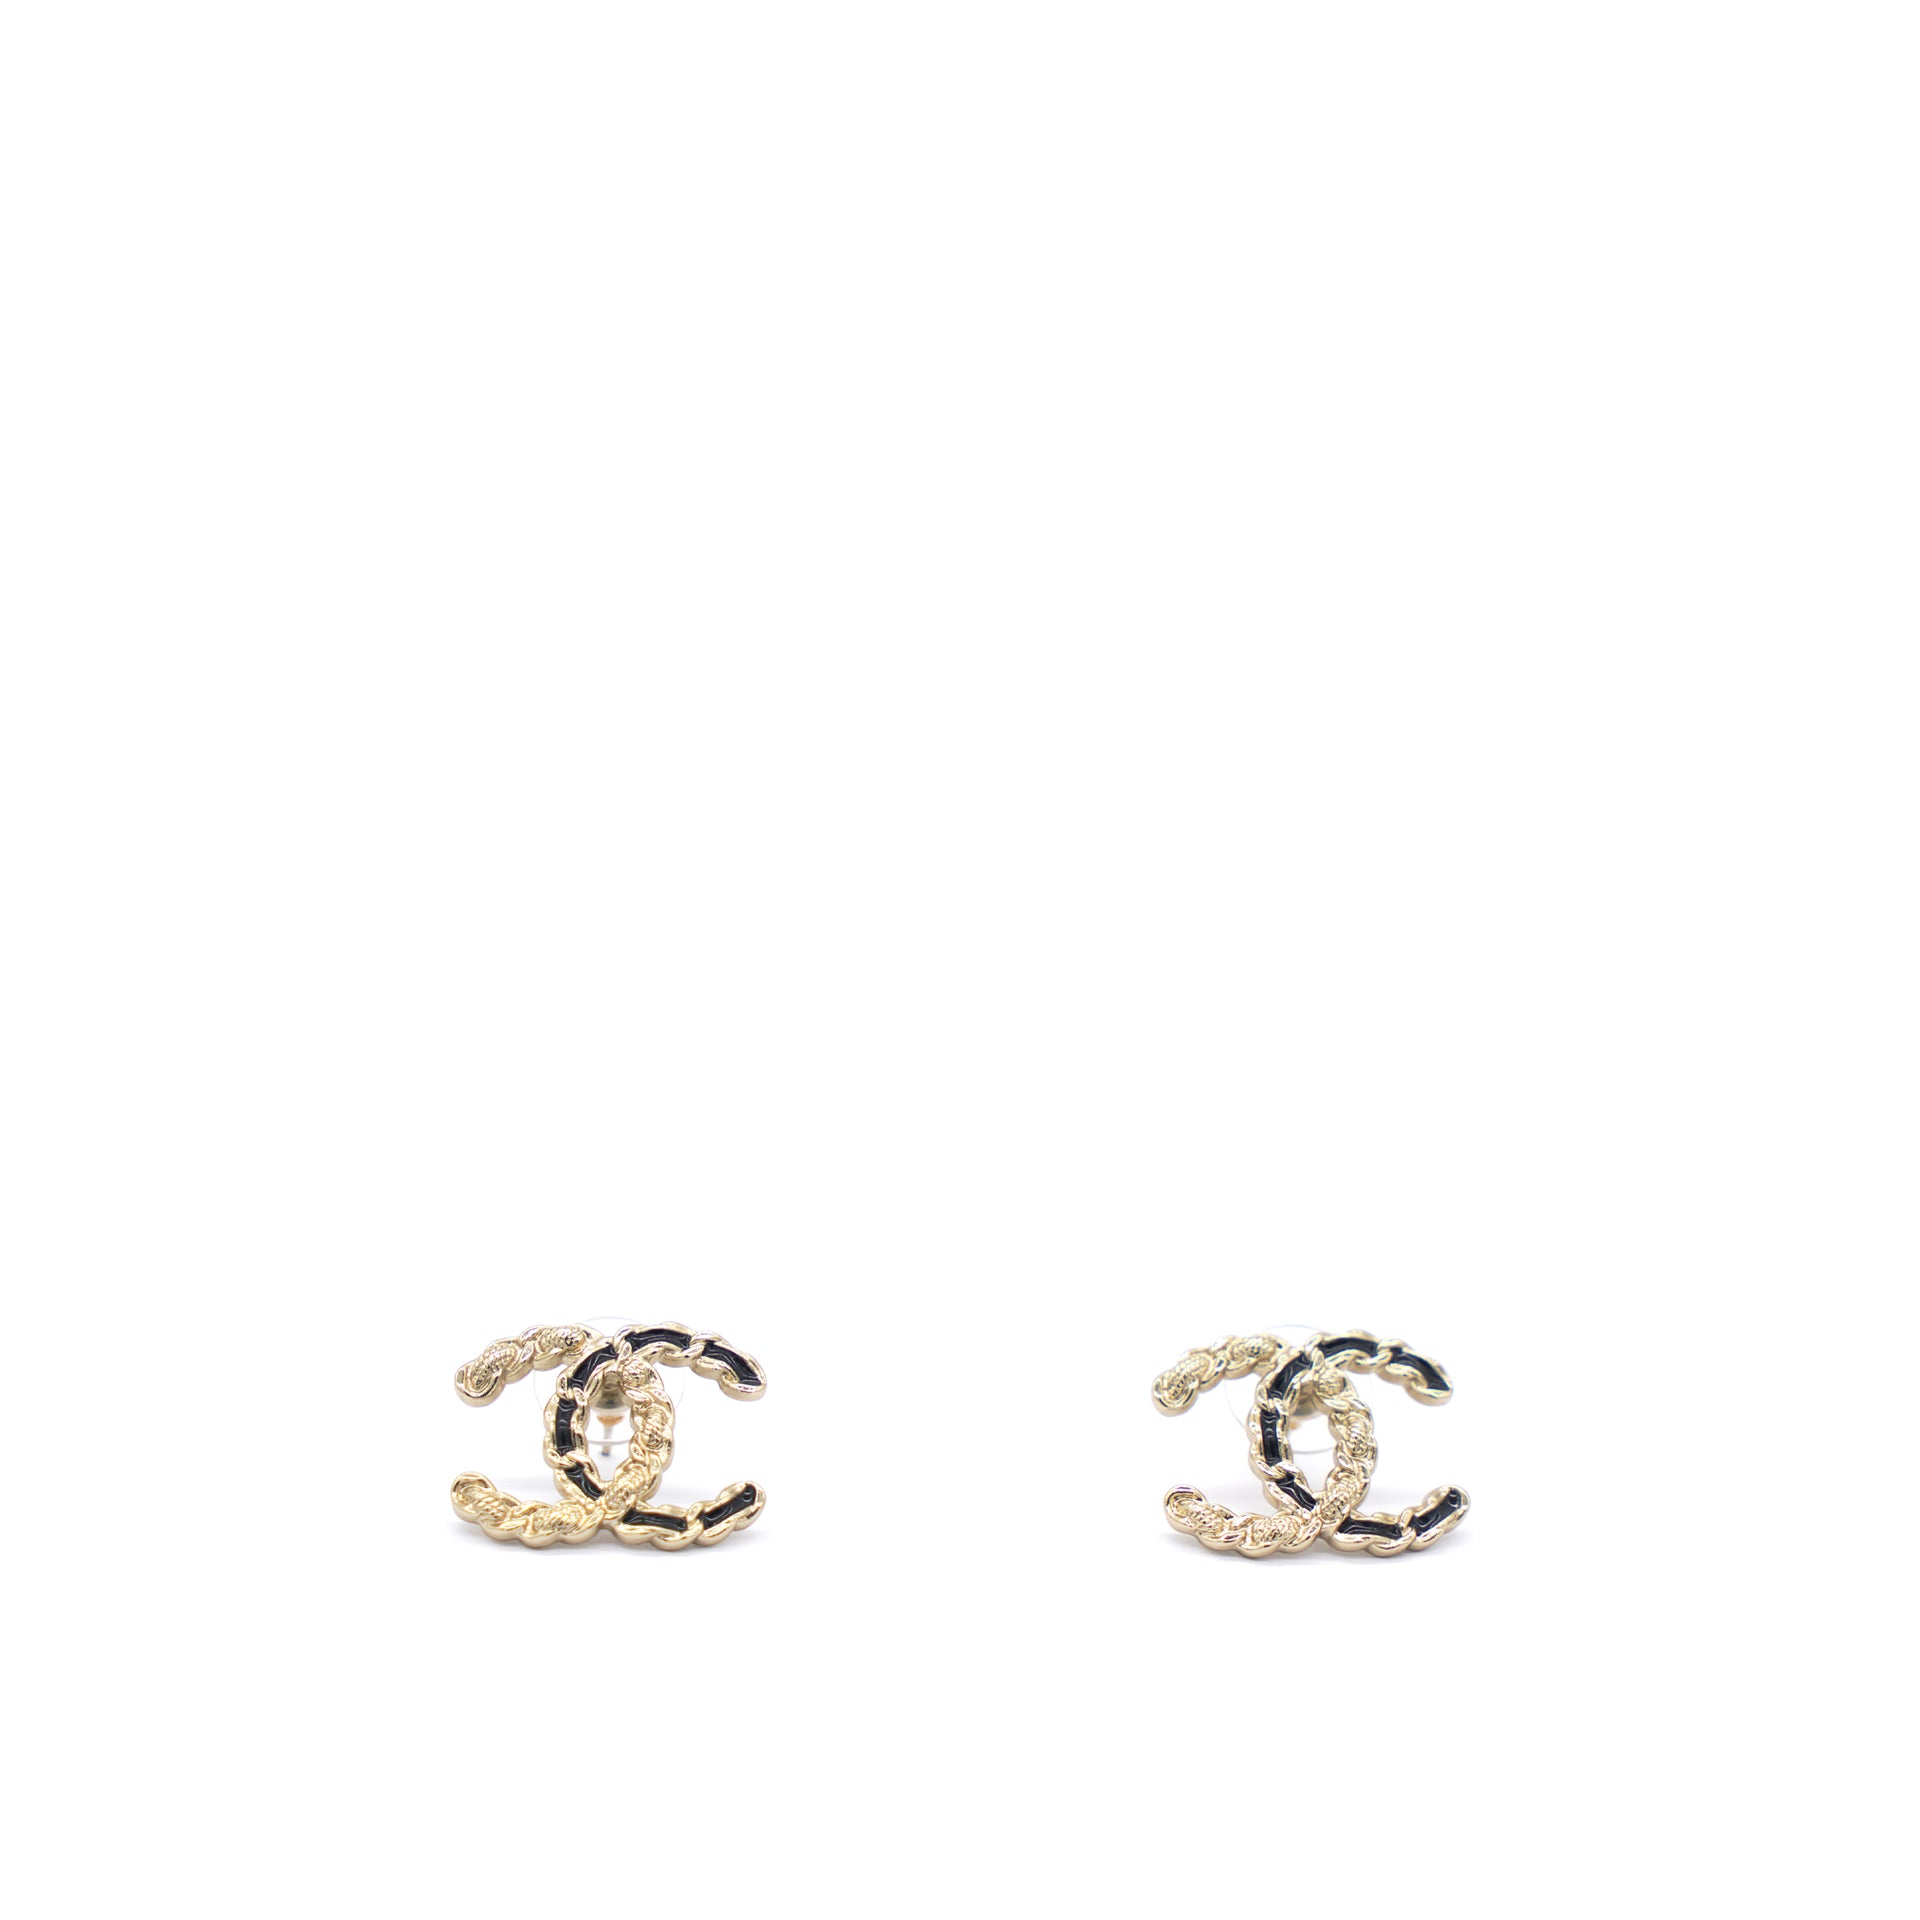 Chanel Earrings  Madison Avenue Couture